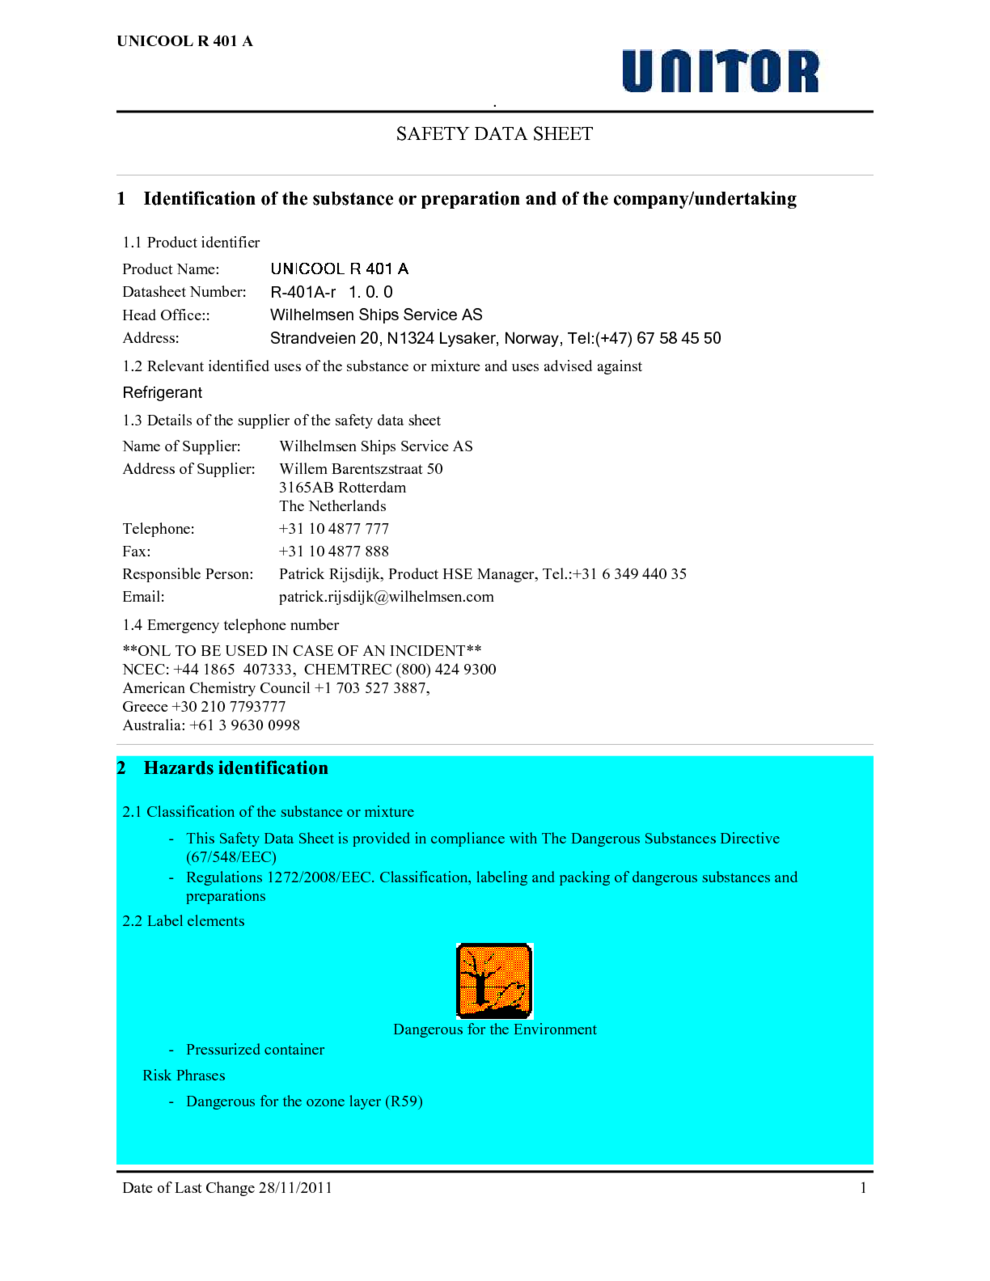 msds 401 r assignment 2